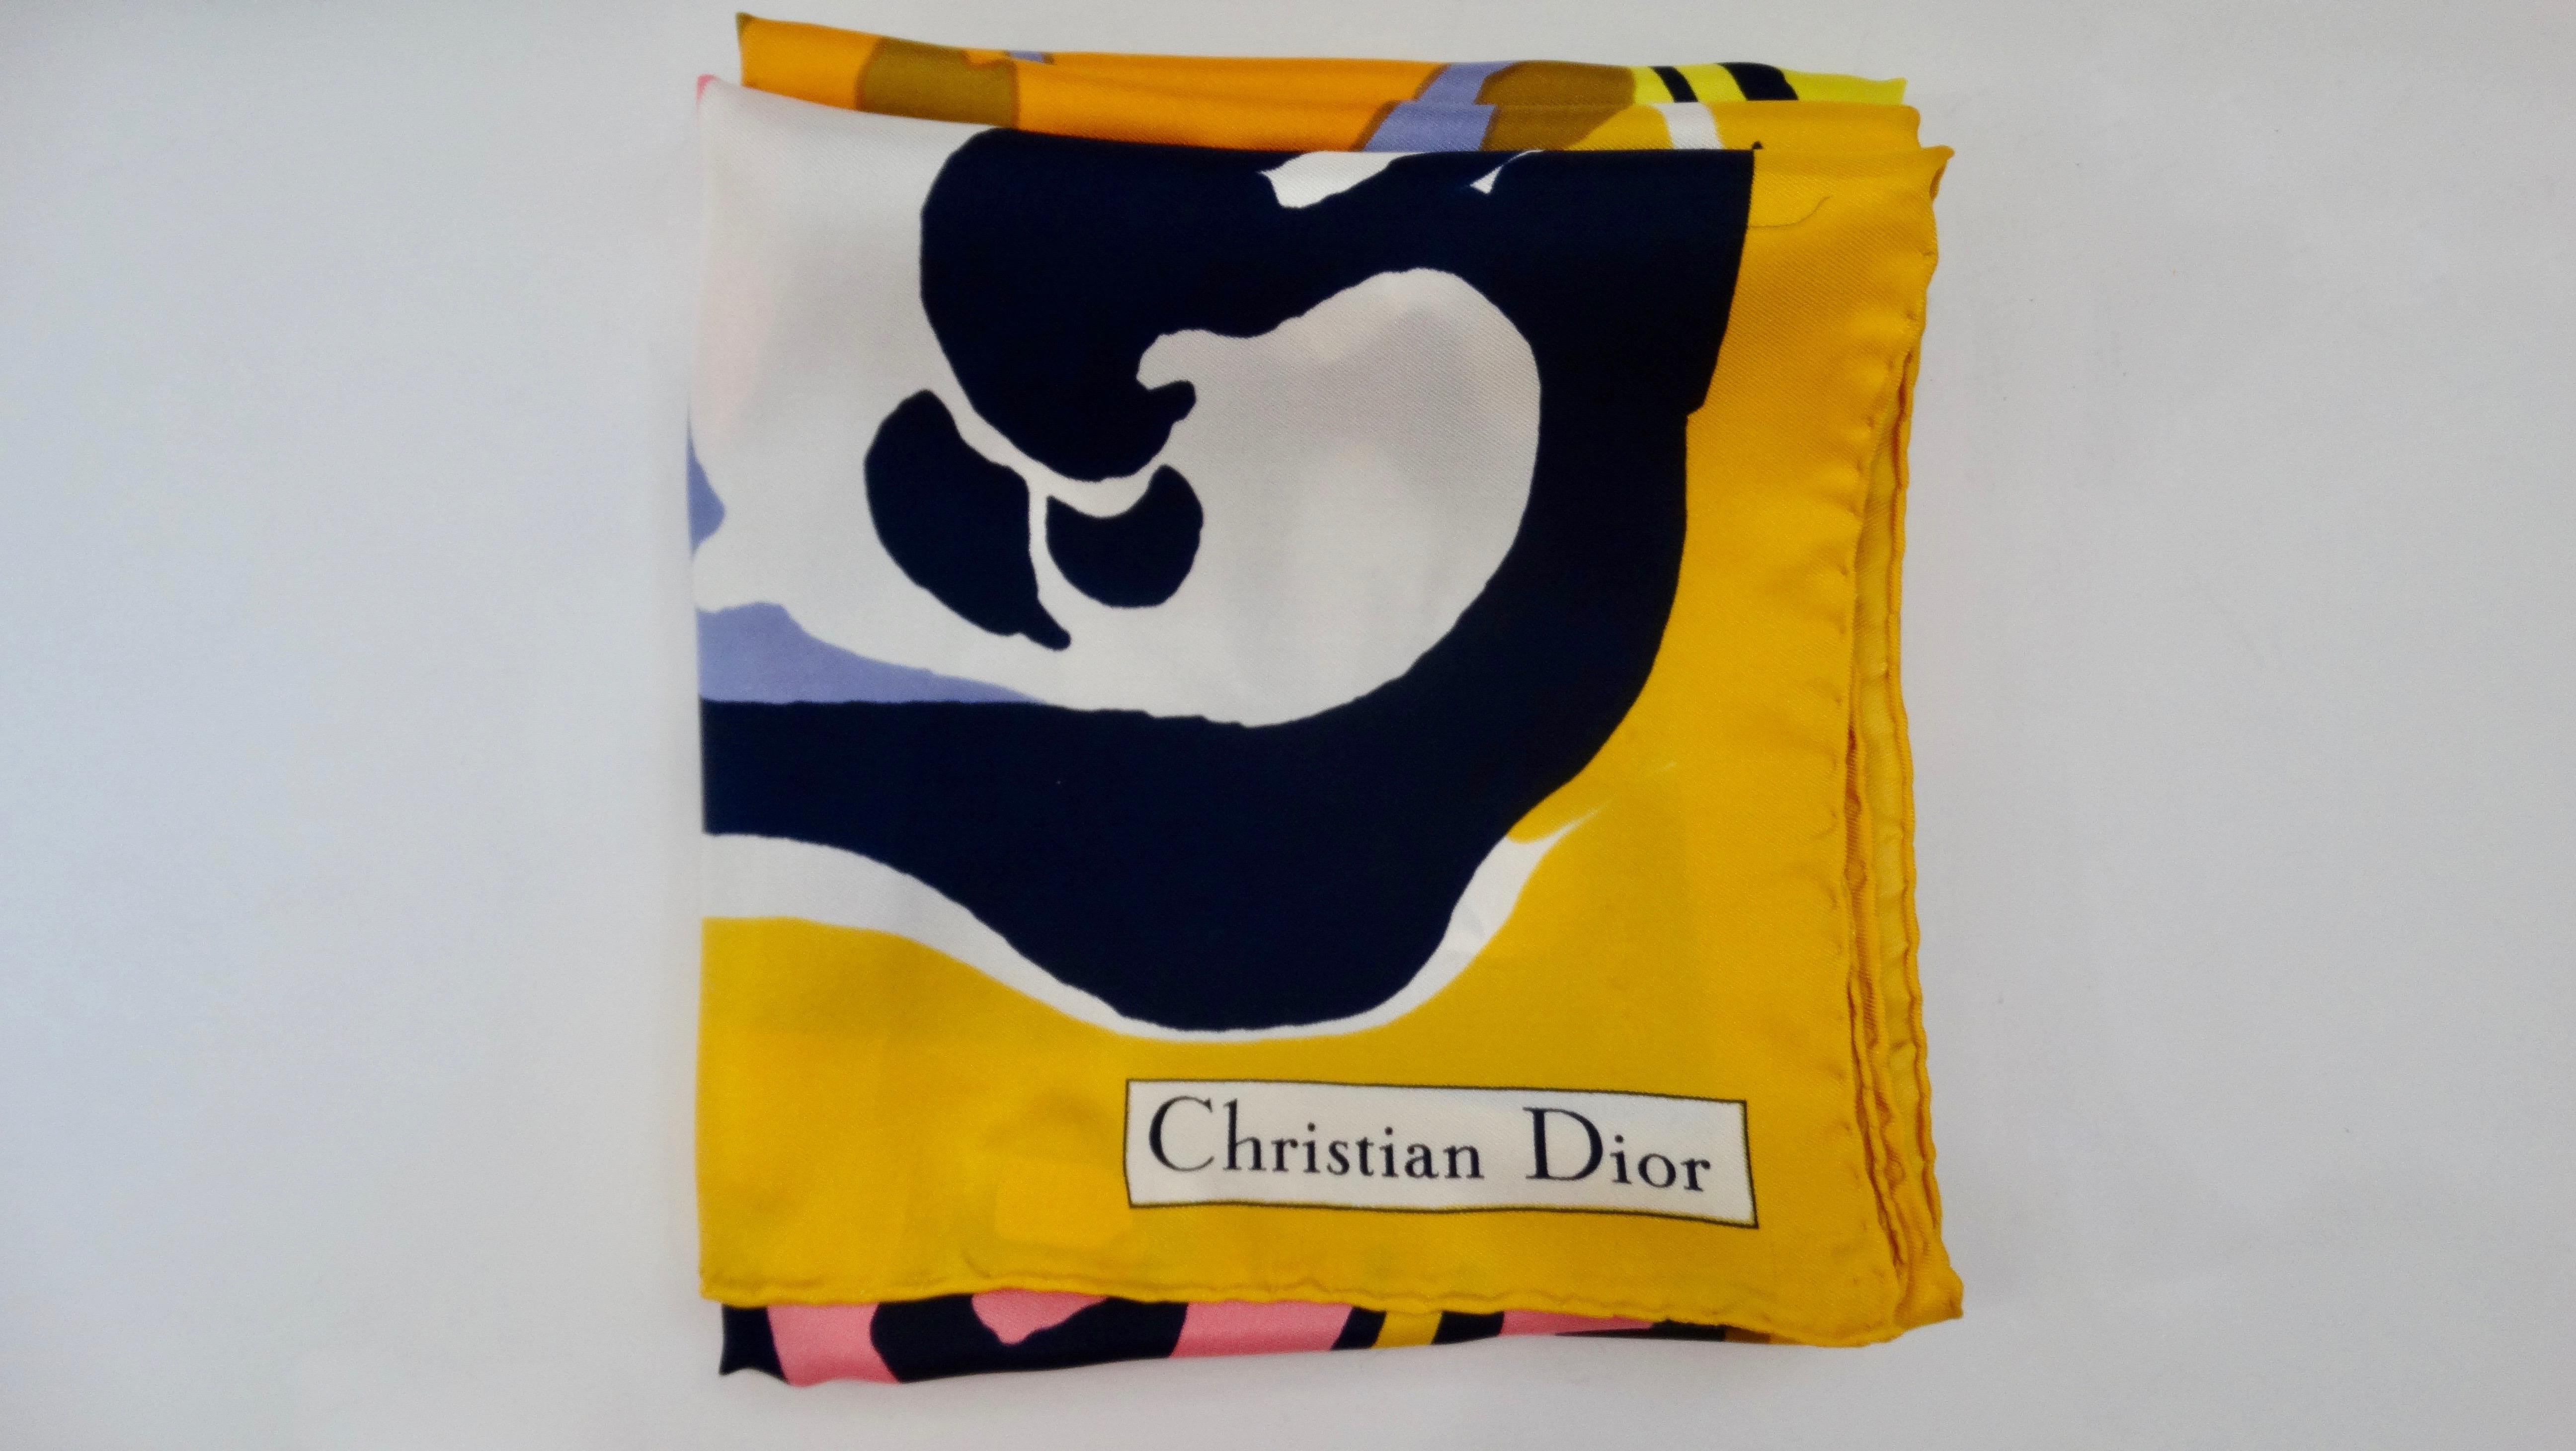 Add some vintage flare to your collection with this Christian Dior scarf! Circa 1970s, this 100% Silk scarf features a multi-colored motif of watercolor painted flowers, hearts, and swirls. Christian Dior in the bottom corner, rolled edges and a